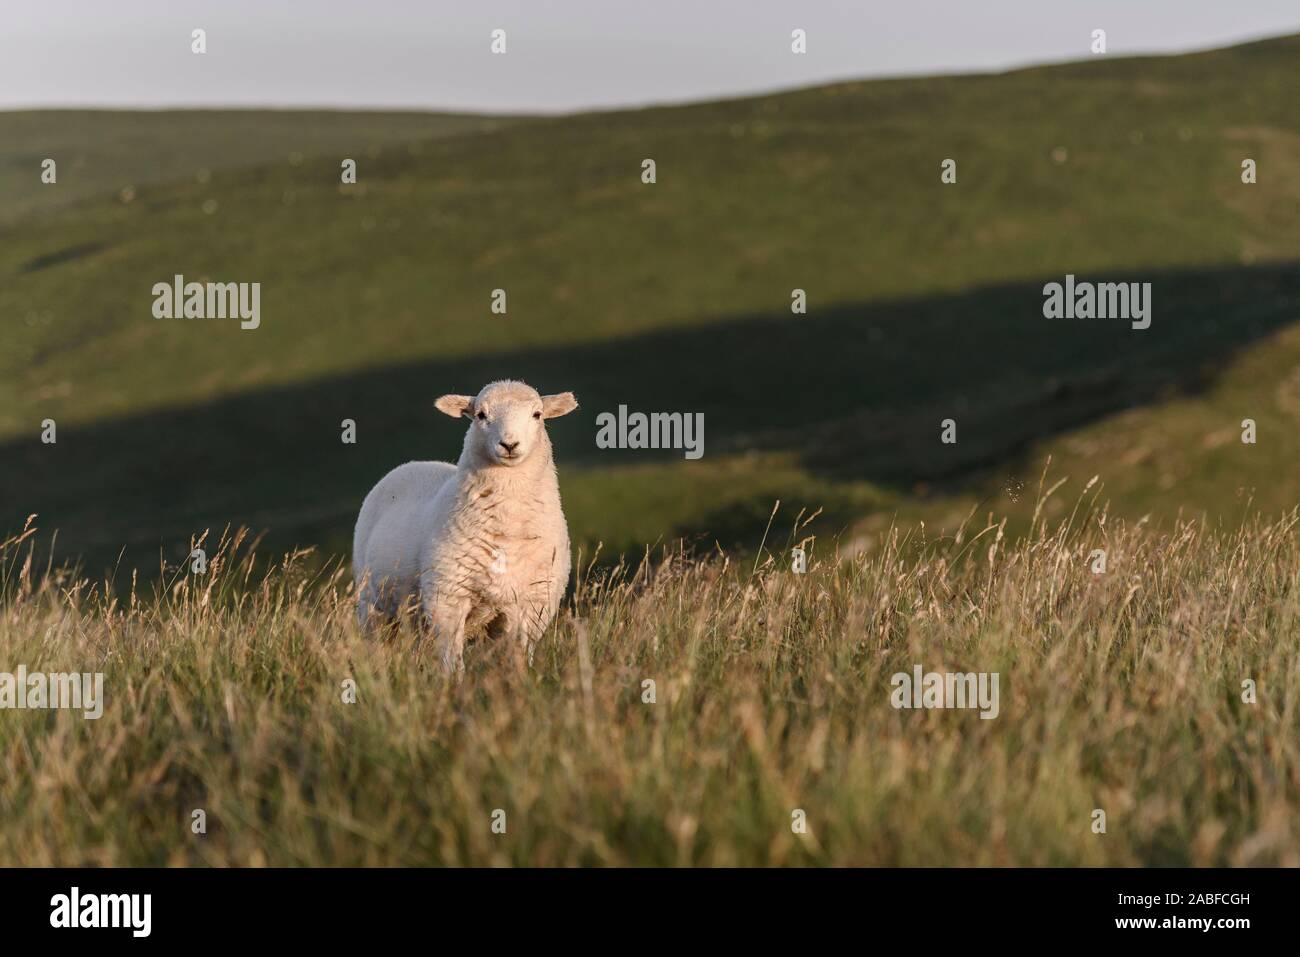 A single lamb, looking directly at the camera, in the natural landscape of mid Wales, UK Stock Photo